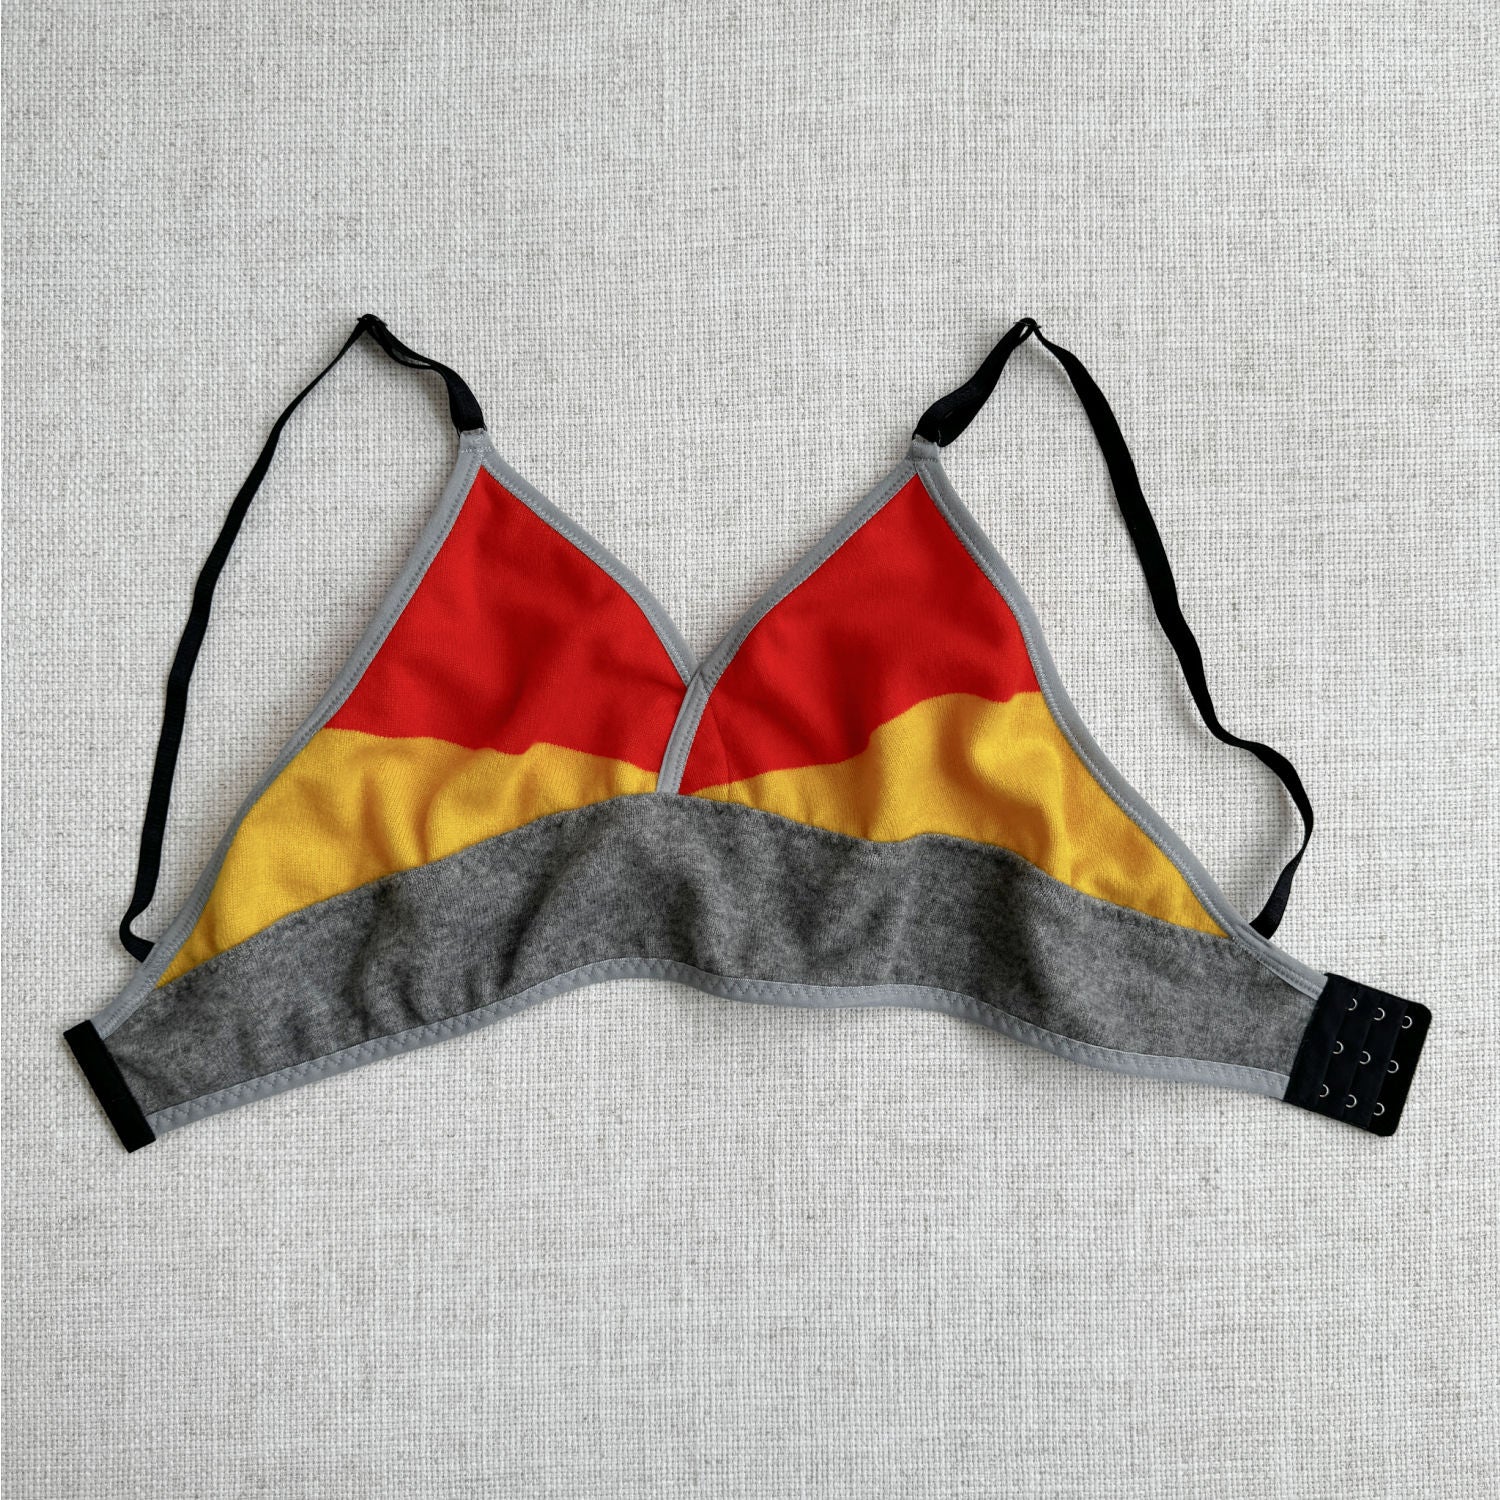 Handmade in Canada by Econica, long cashmere bra top, striking Grey, Orange, and Yellow palette, premium cashmere material, artisanal quality, elegant and cozy, soft-to-the-touch, perfect for layering, sustainable choice, durable construction, stylish loungewear